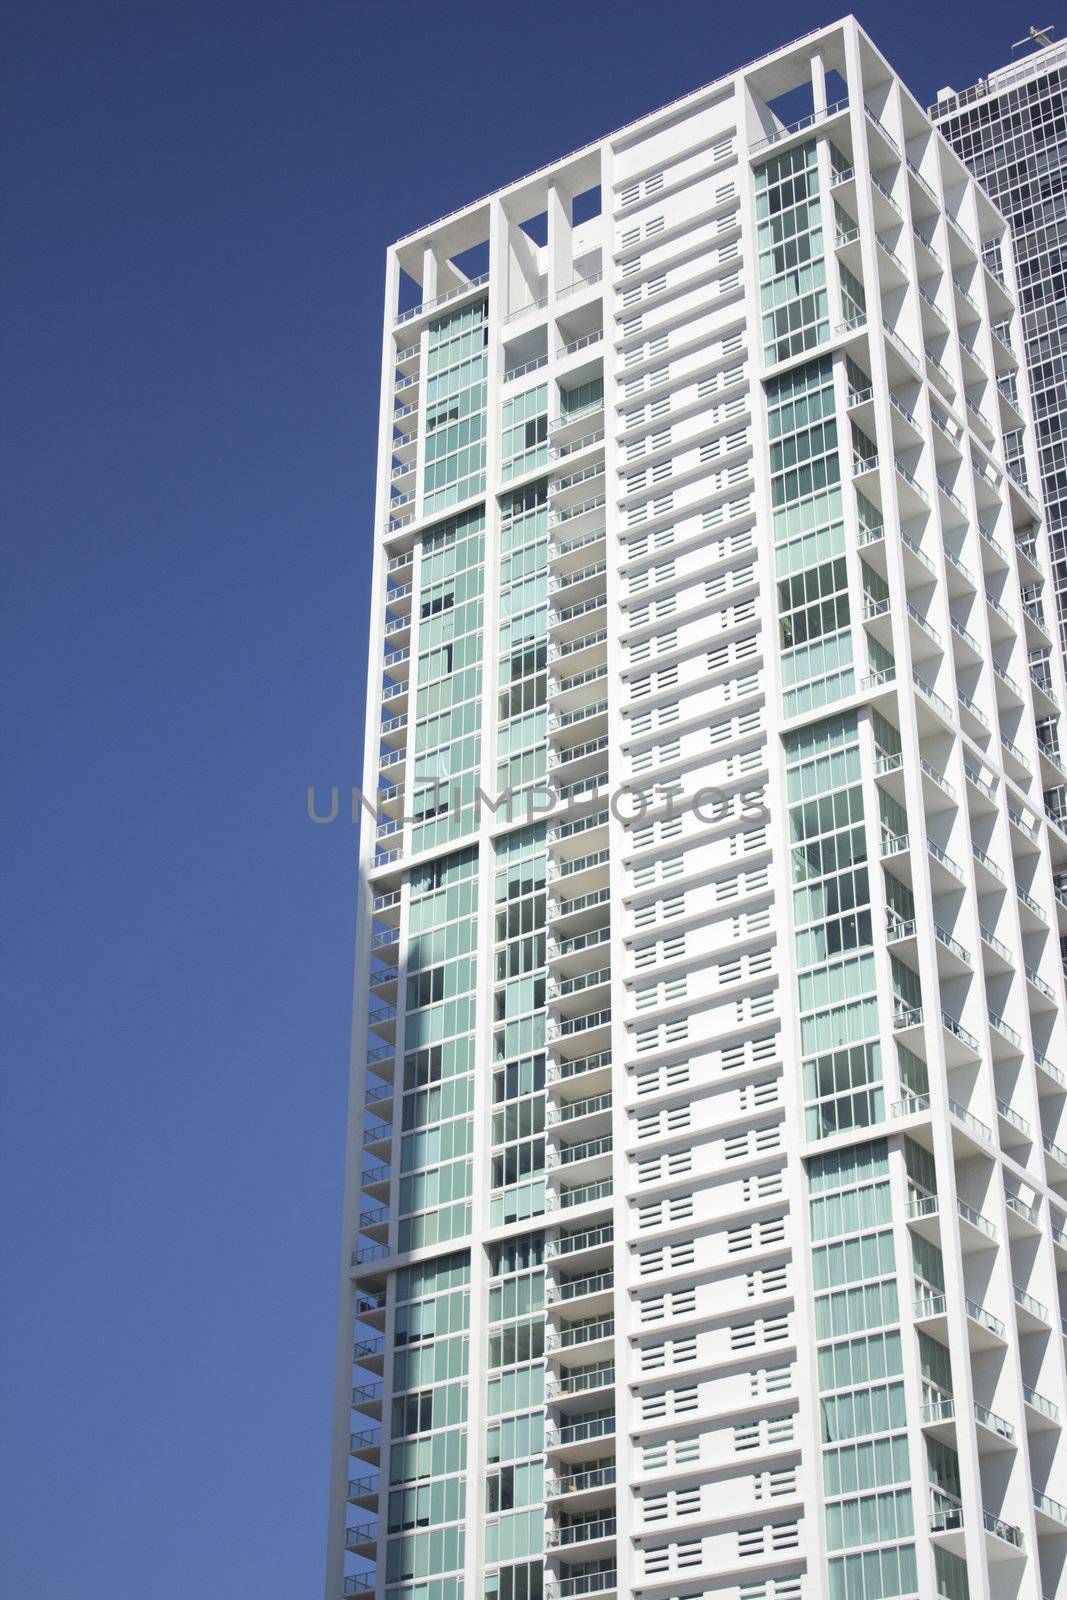 Office Buildings or Condos with a blue sky background